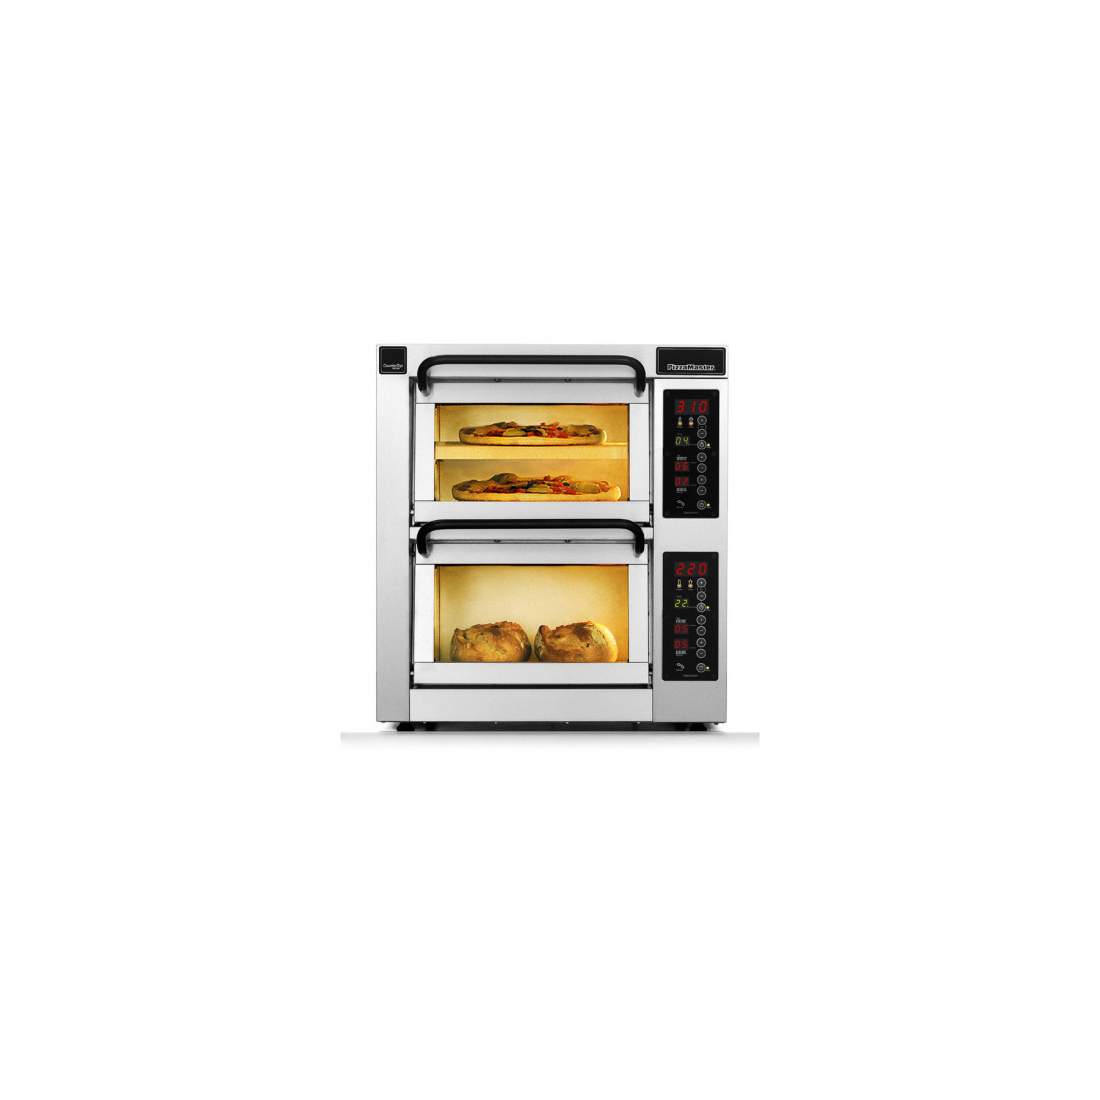 PizzaMaster ,PM352ED-1, Countertop Electric Pizza Oven 2 Units, 3 Stones|mkayn|مكاين